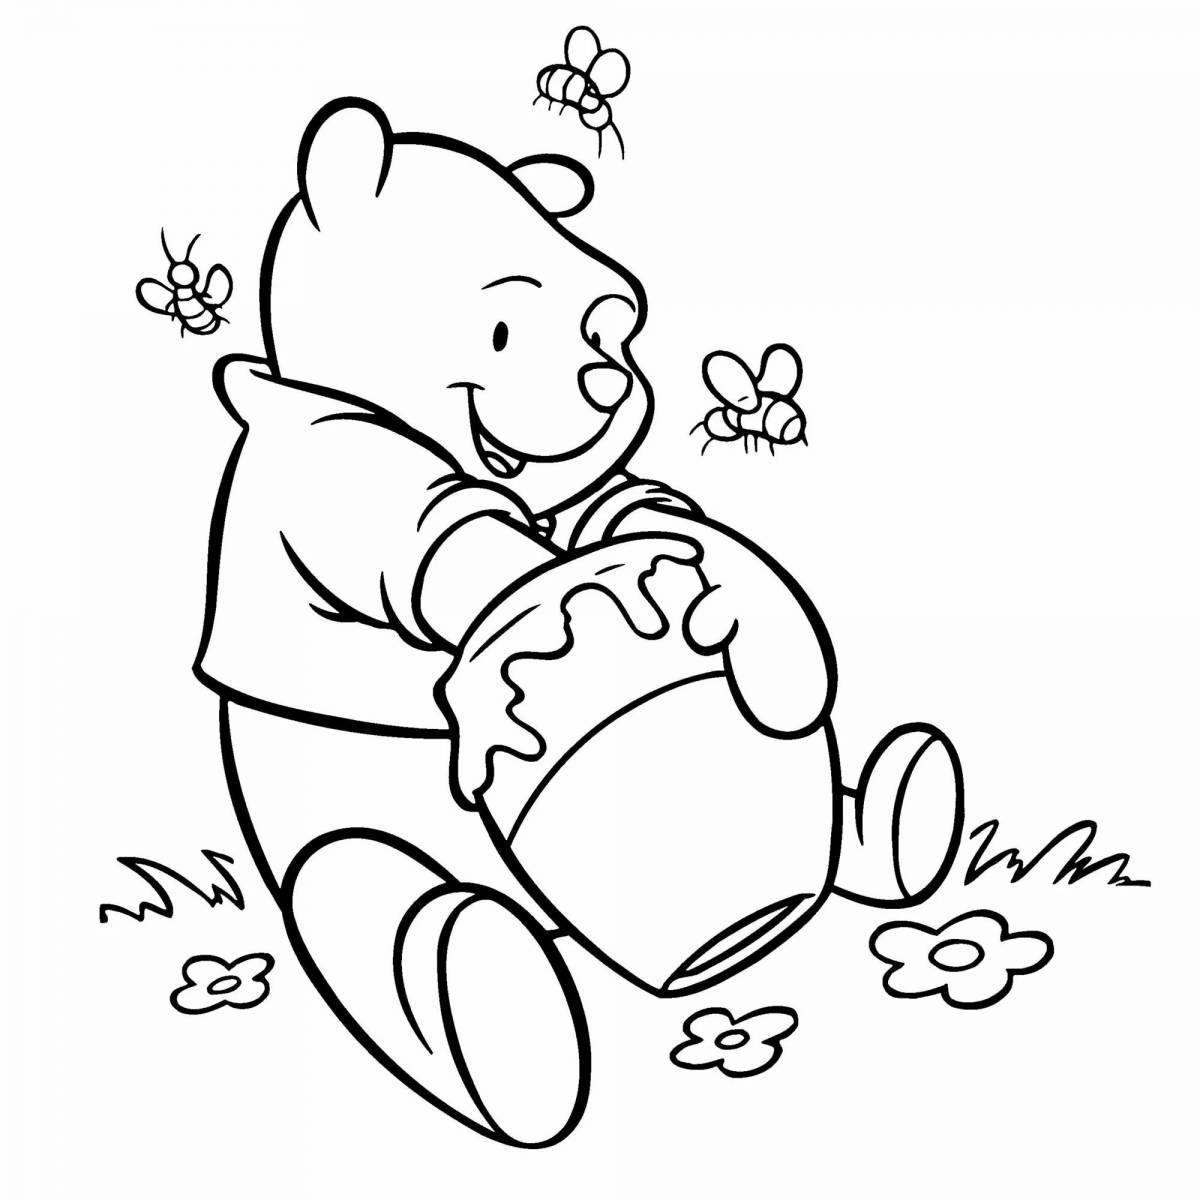 Charming bear coloring page